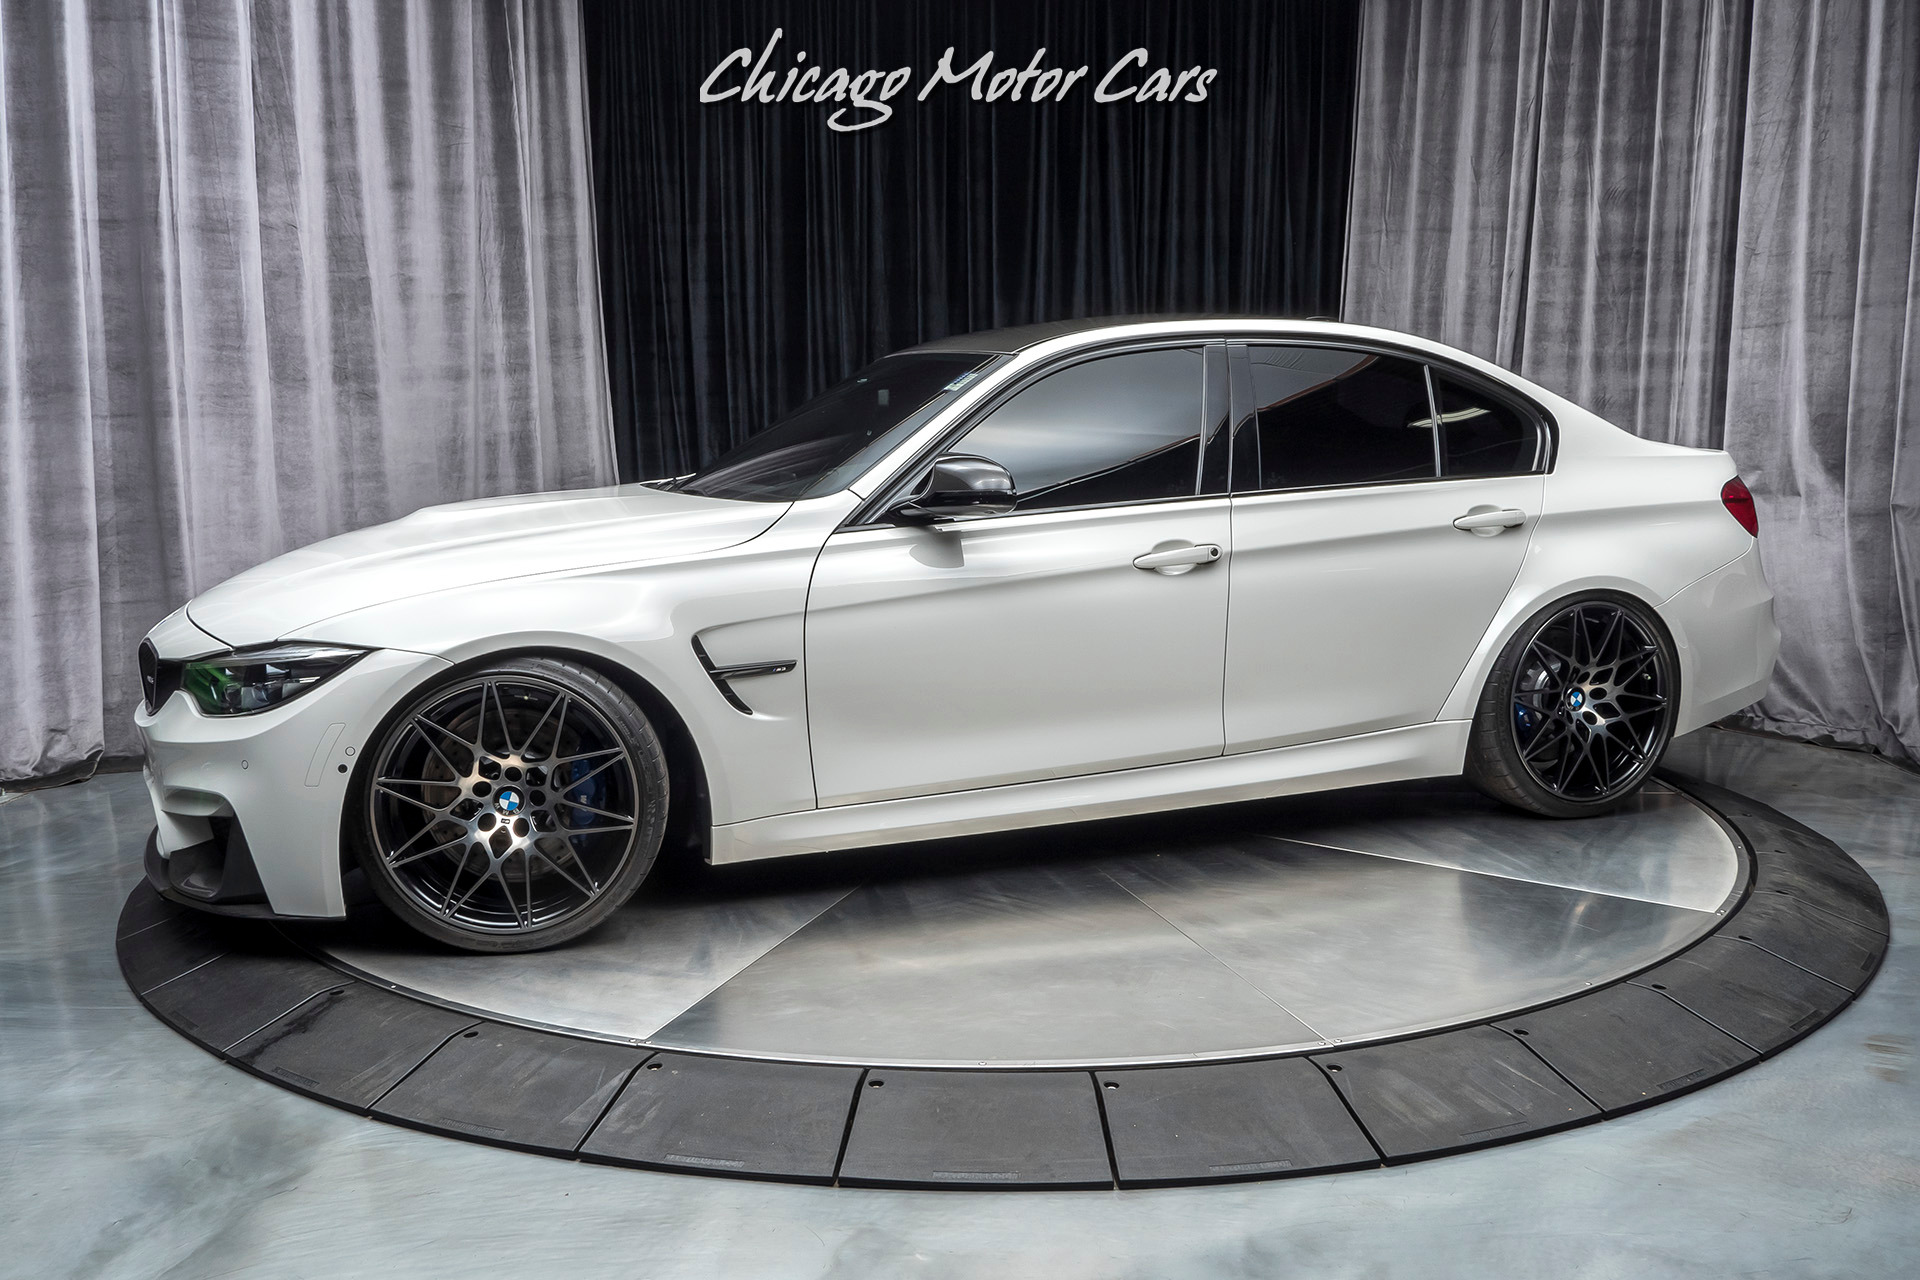 Used 18 Bmw M3 Competition Sedan Msrp k Upgrades Loaded Carbon Fiber For Sale Special Pricing Chicago Motor Cars Stock